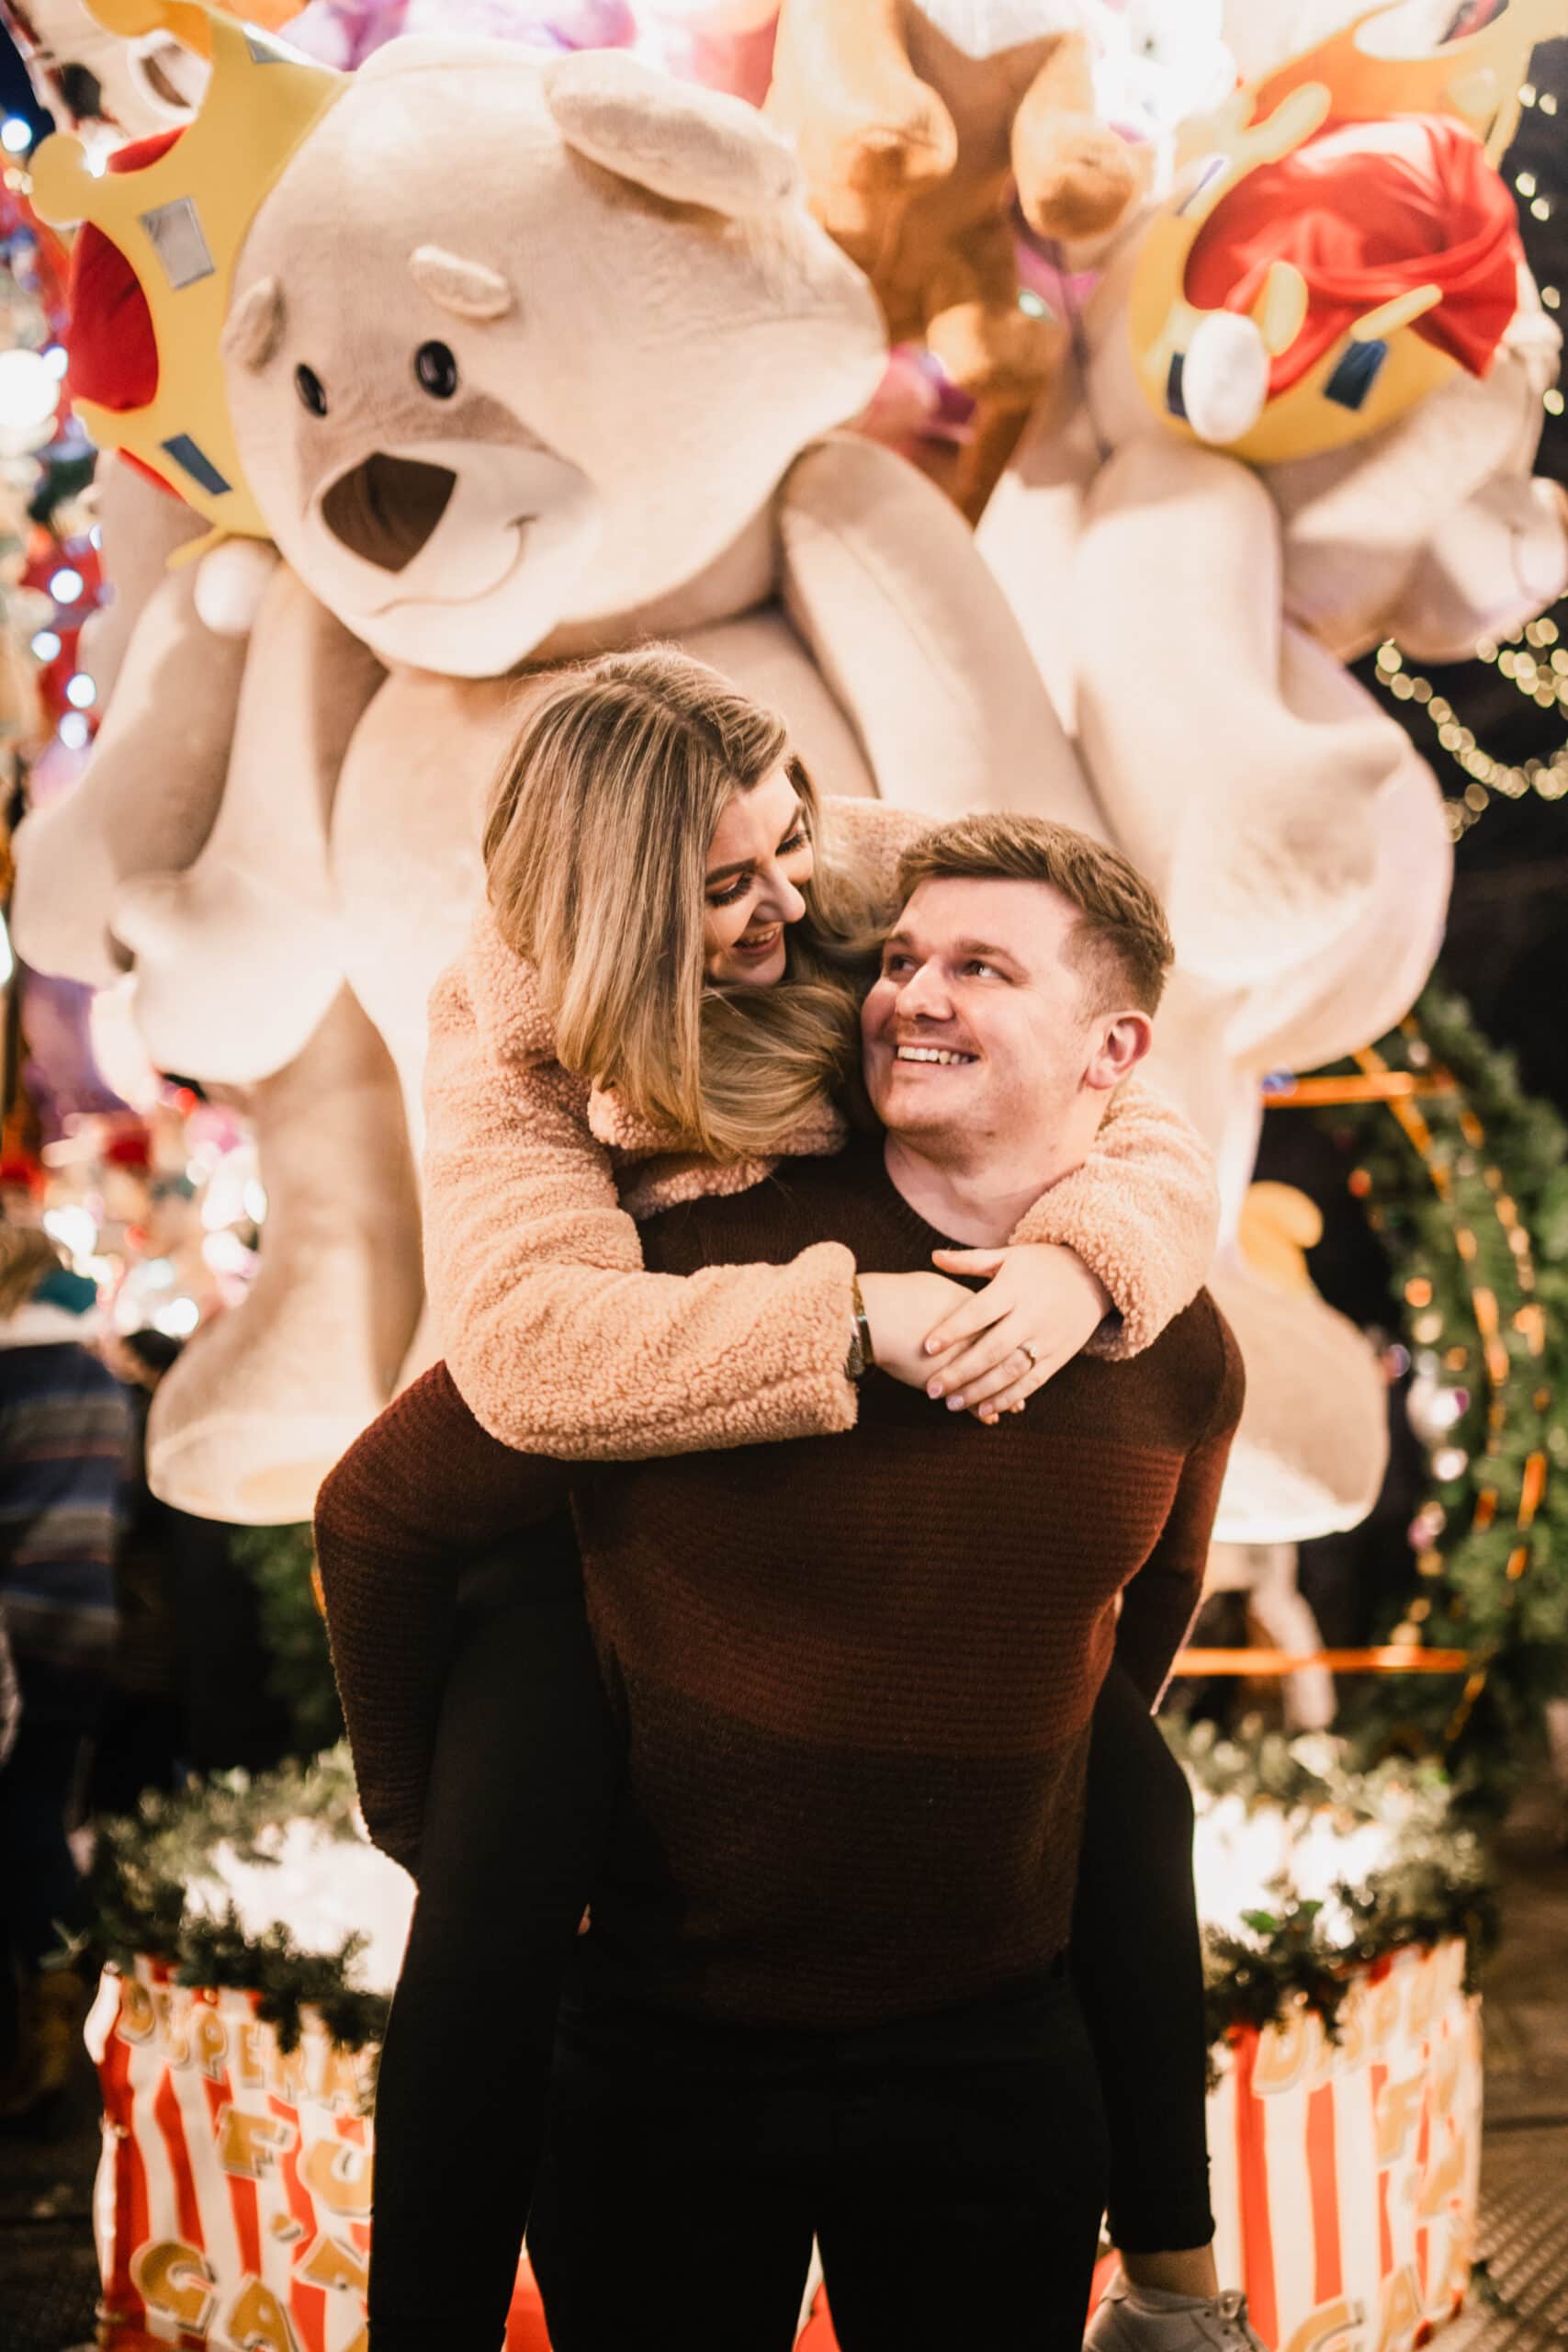 A joyful couple embraces in front of a festive backdrop with large plush toys and christmas decorations, sharing a tender moment under glowing lights.